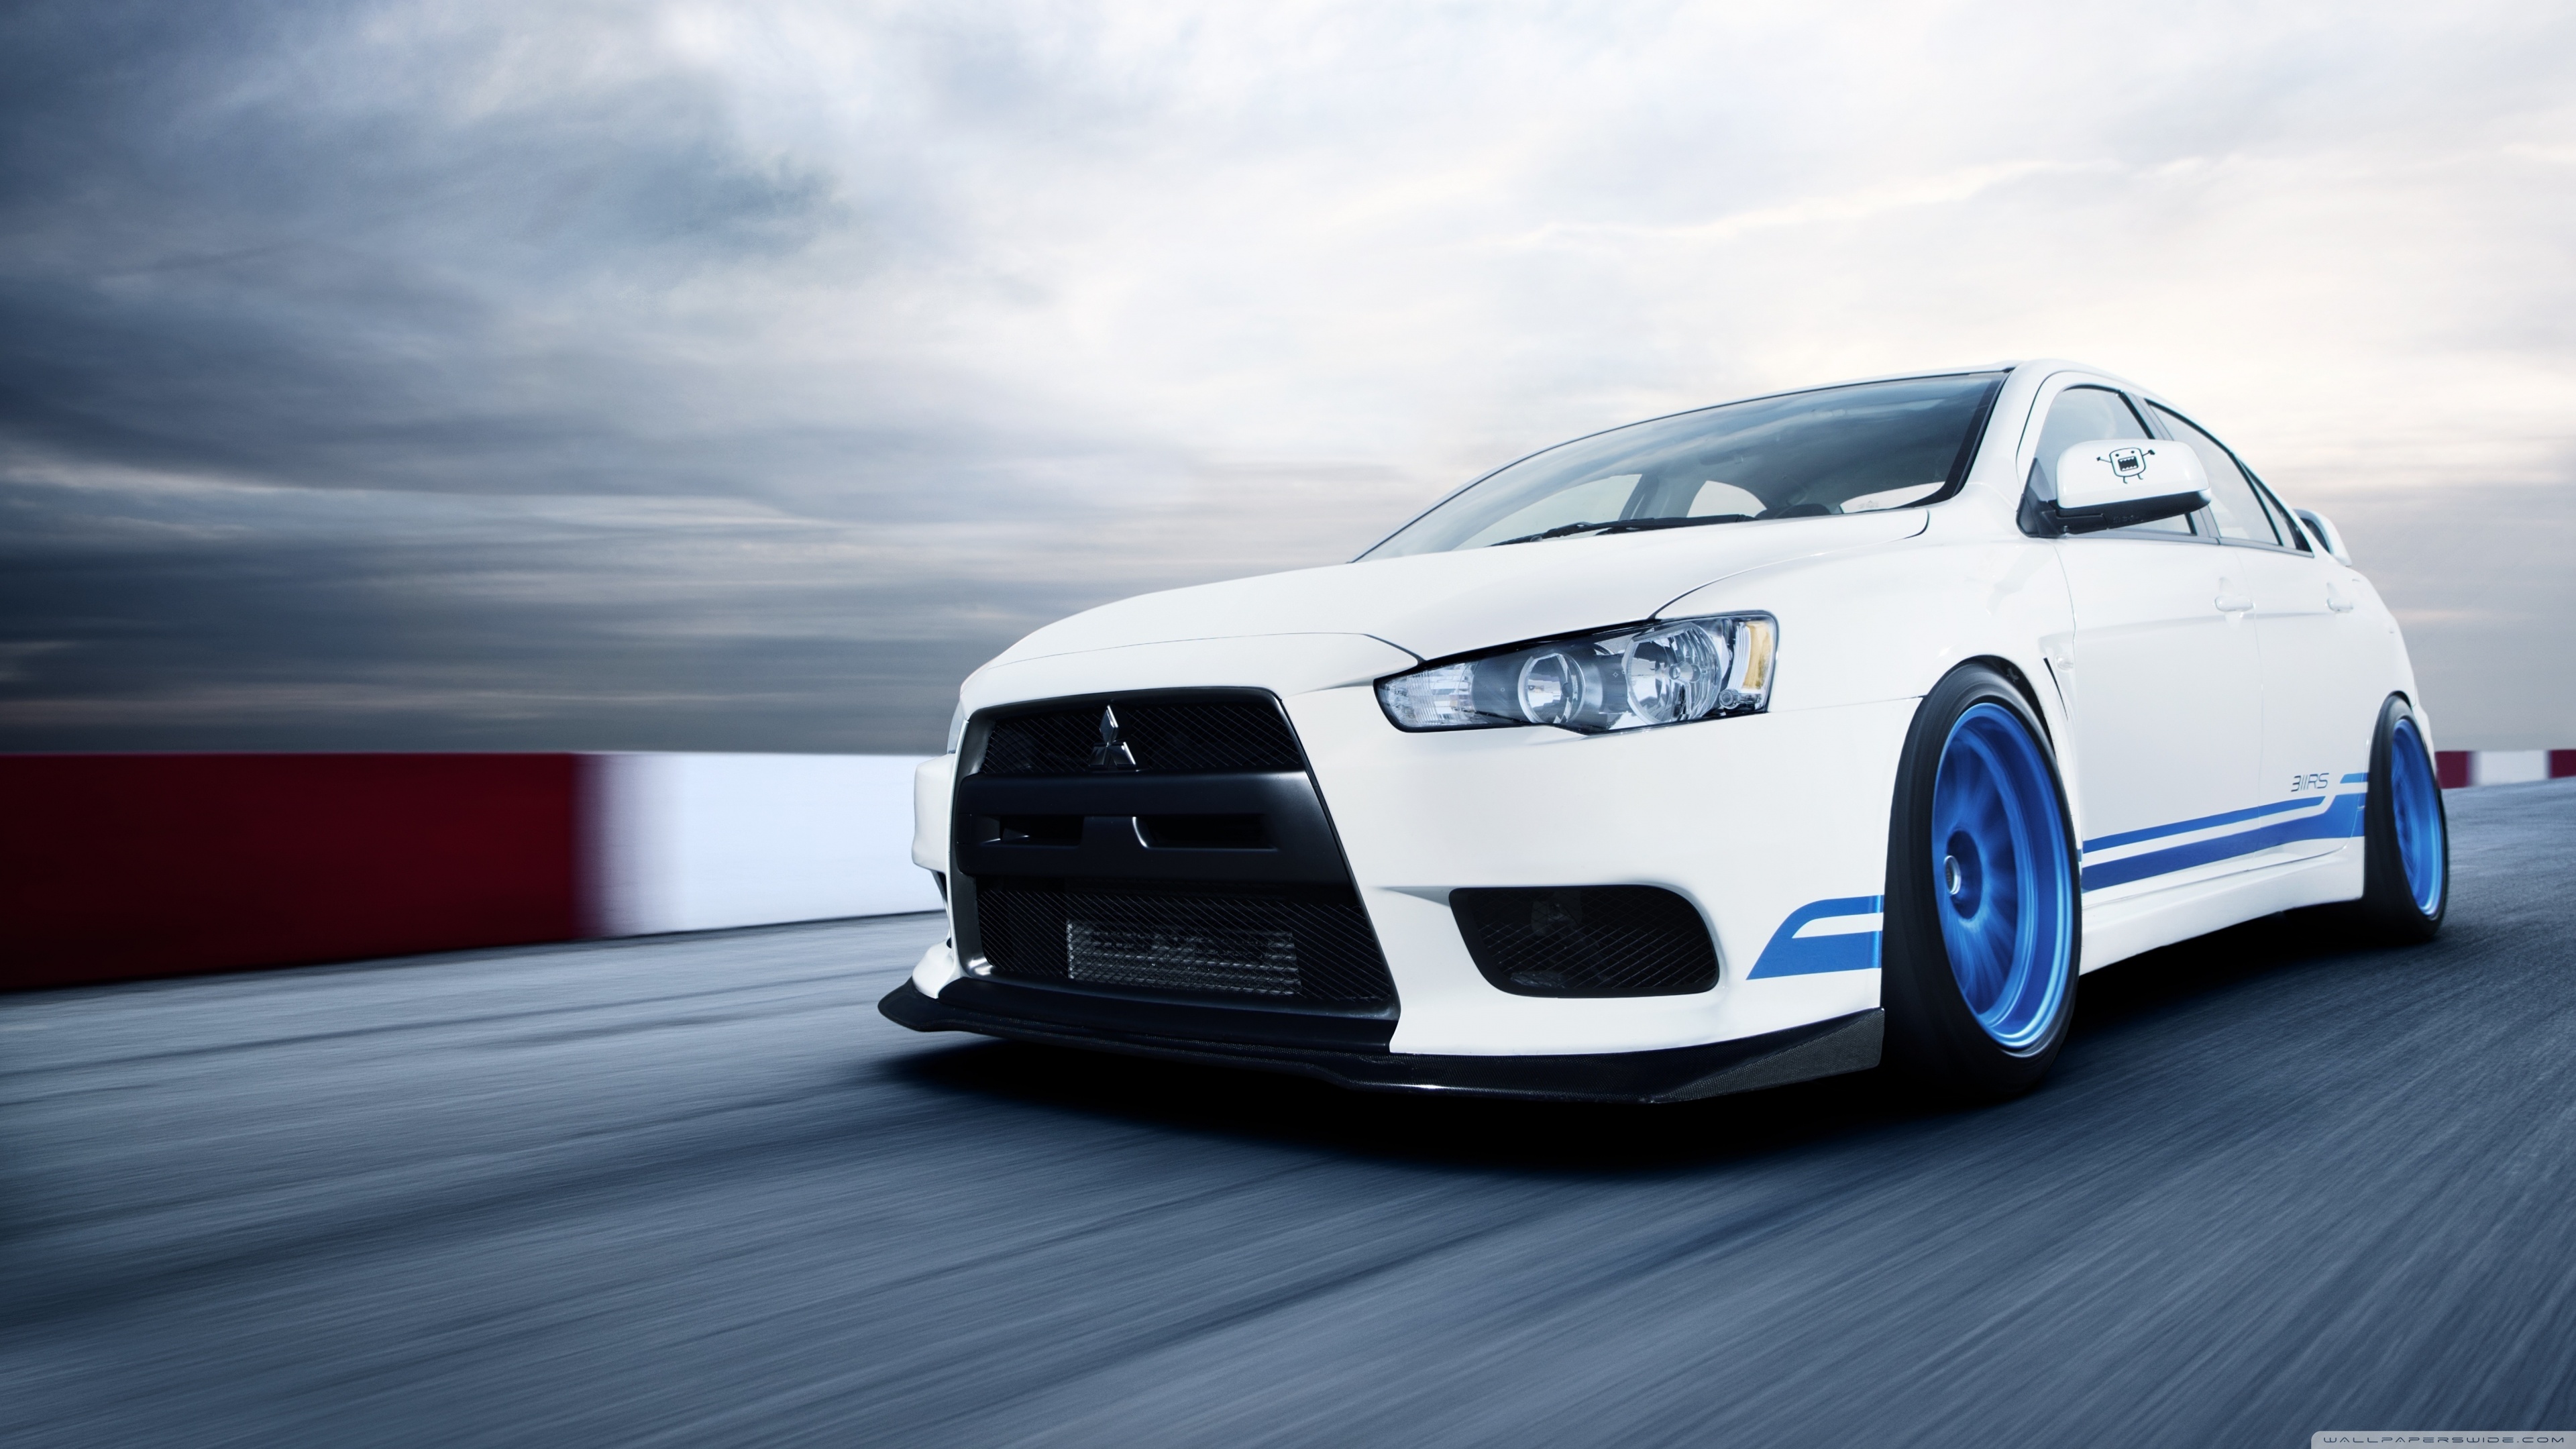 Cars Poster Mitsubishi Lancer Evolution X Wallpaper HD Prints Canvas  Painting Wall art Picture Home Decorations - AliExpress